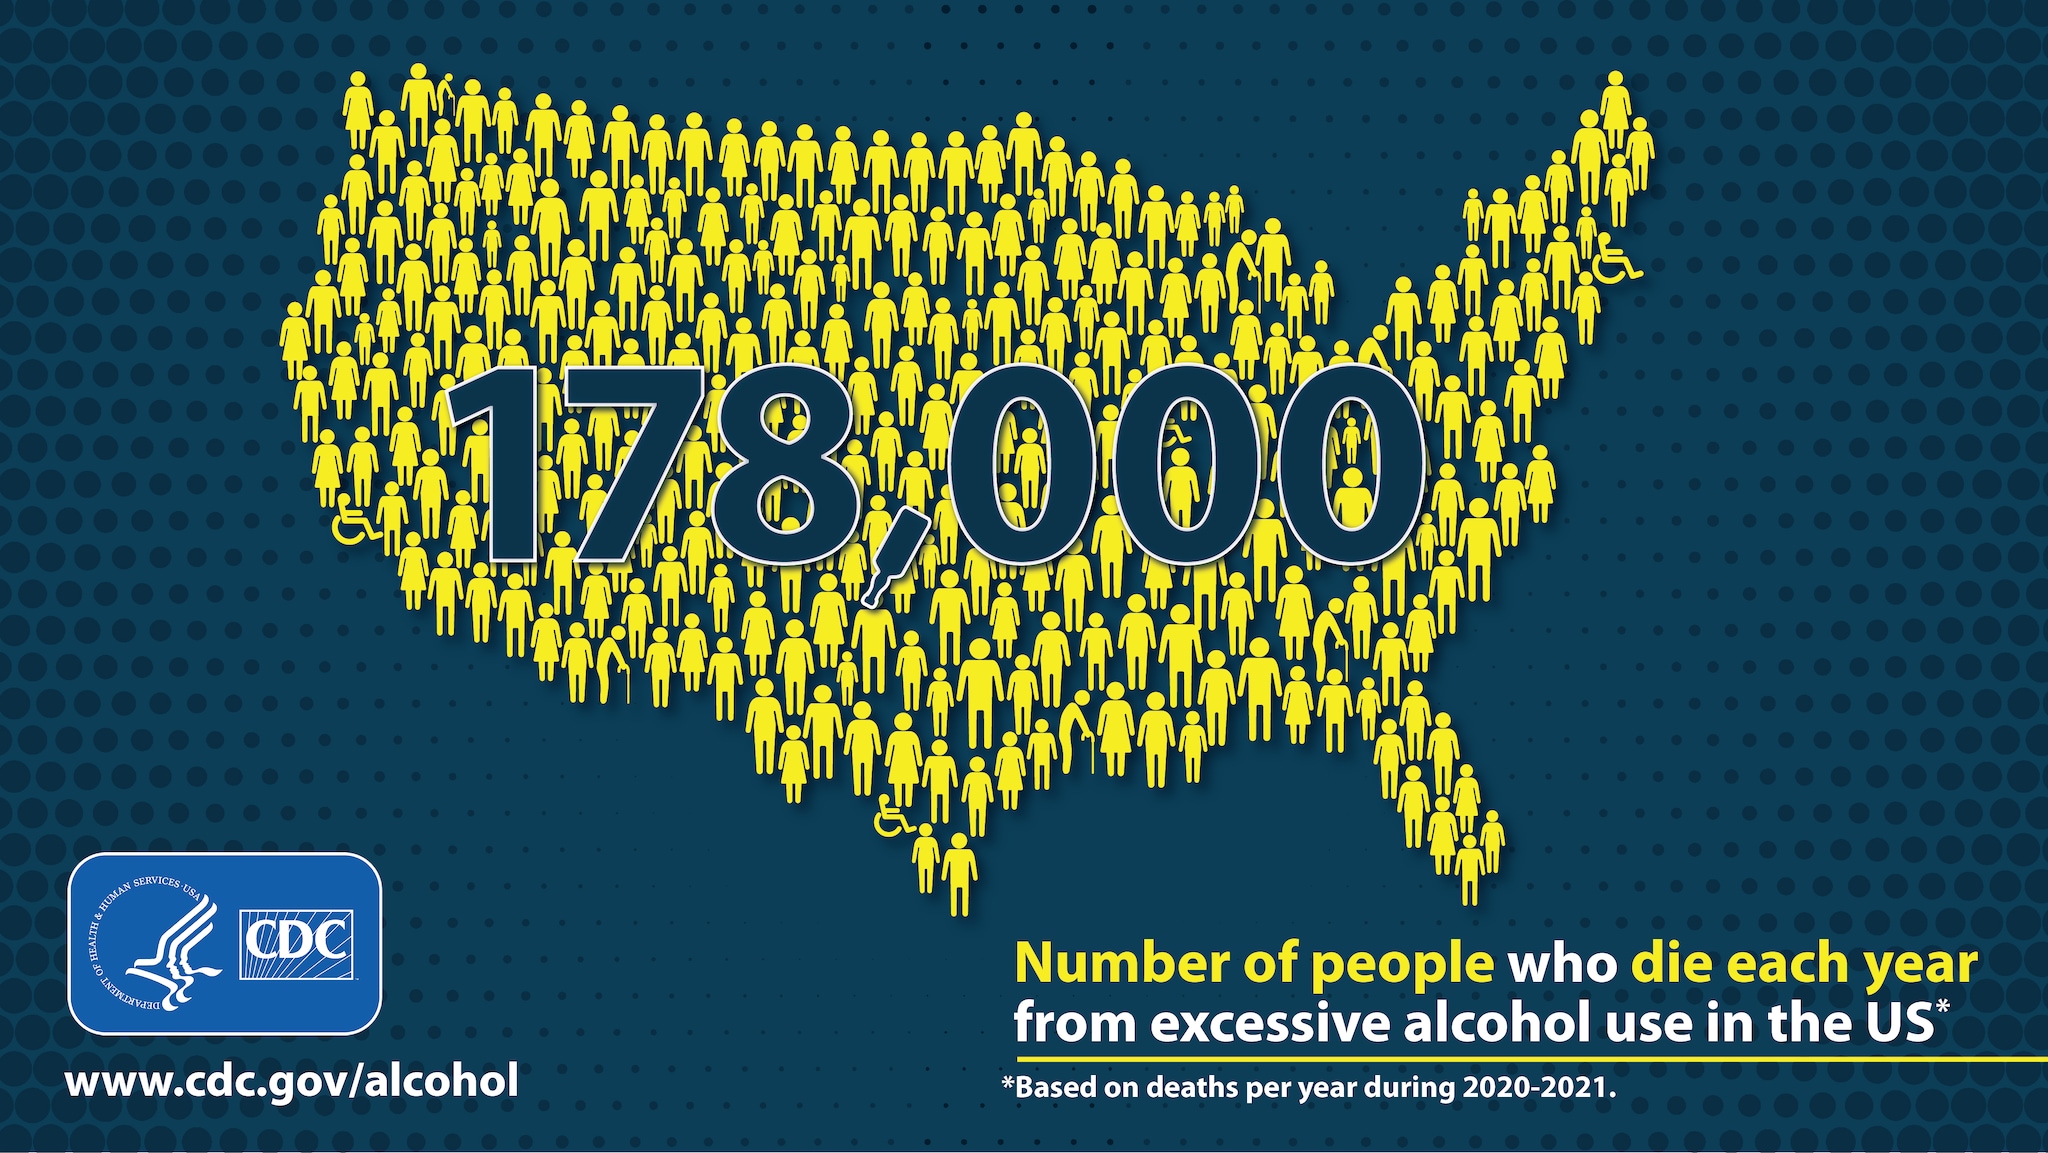 More than 178,000 people die from excessive alcohol use in the US each year.